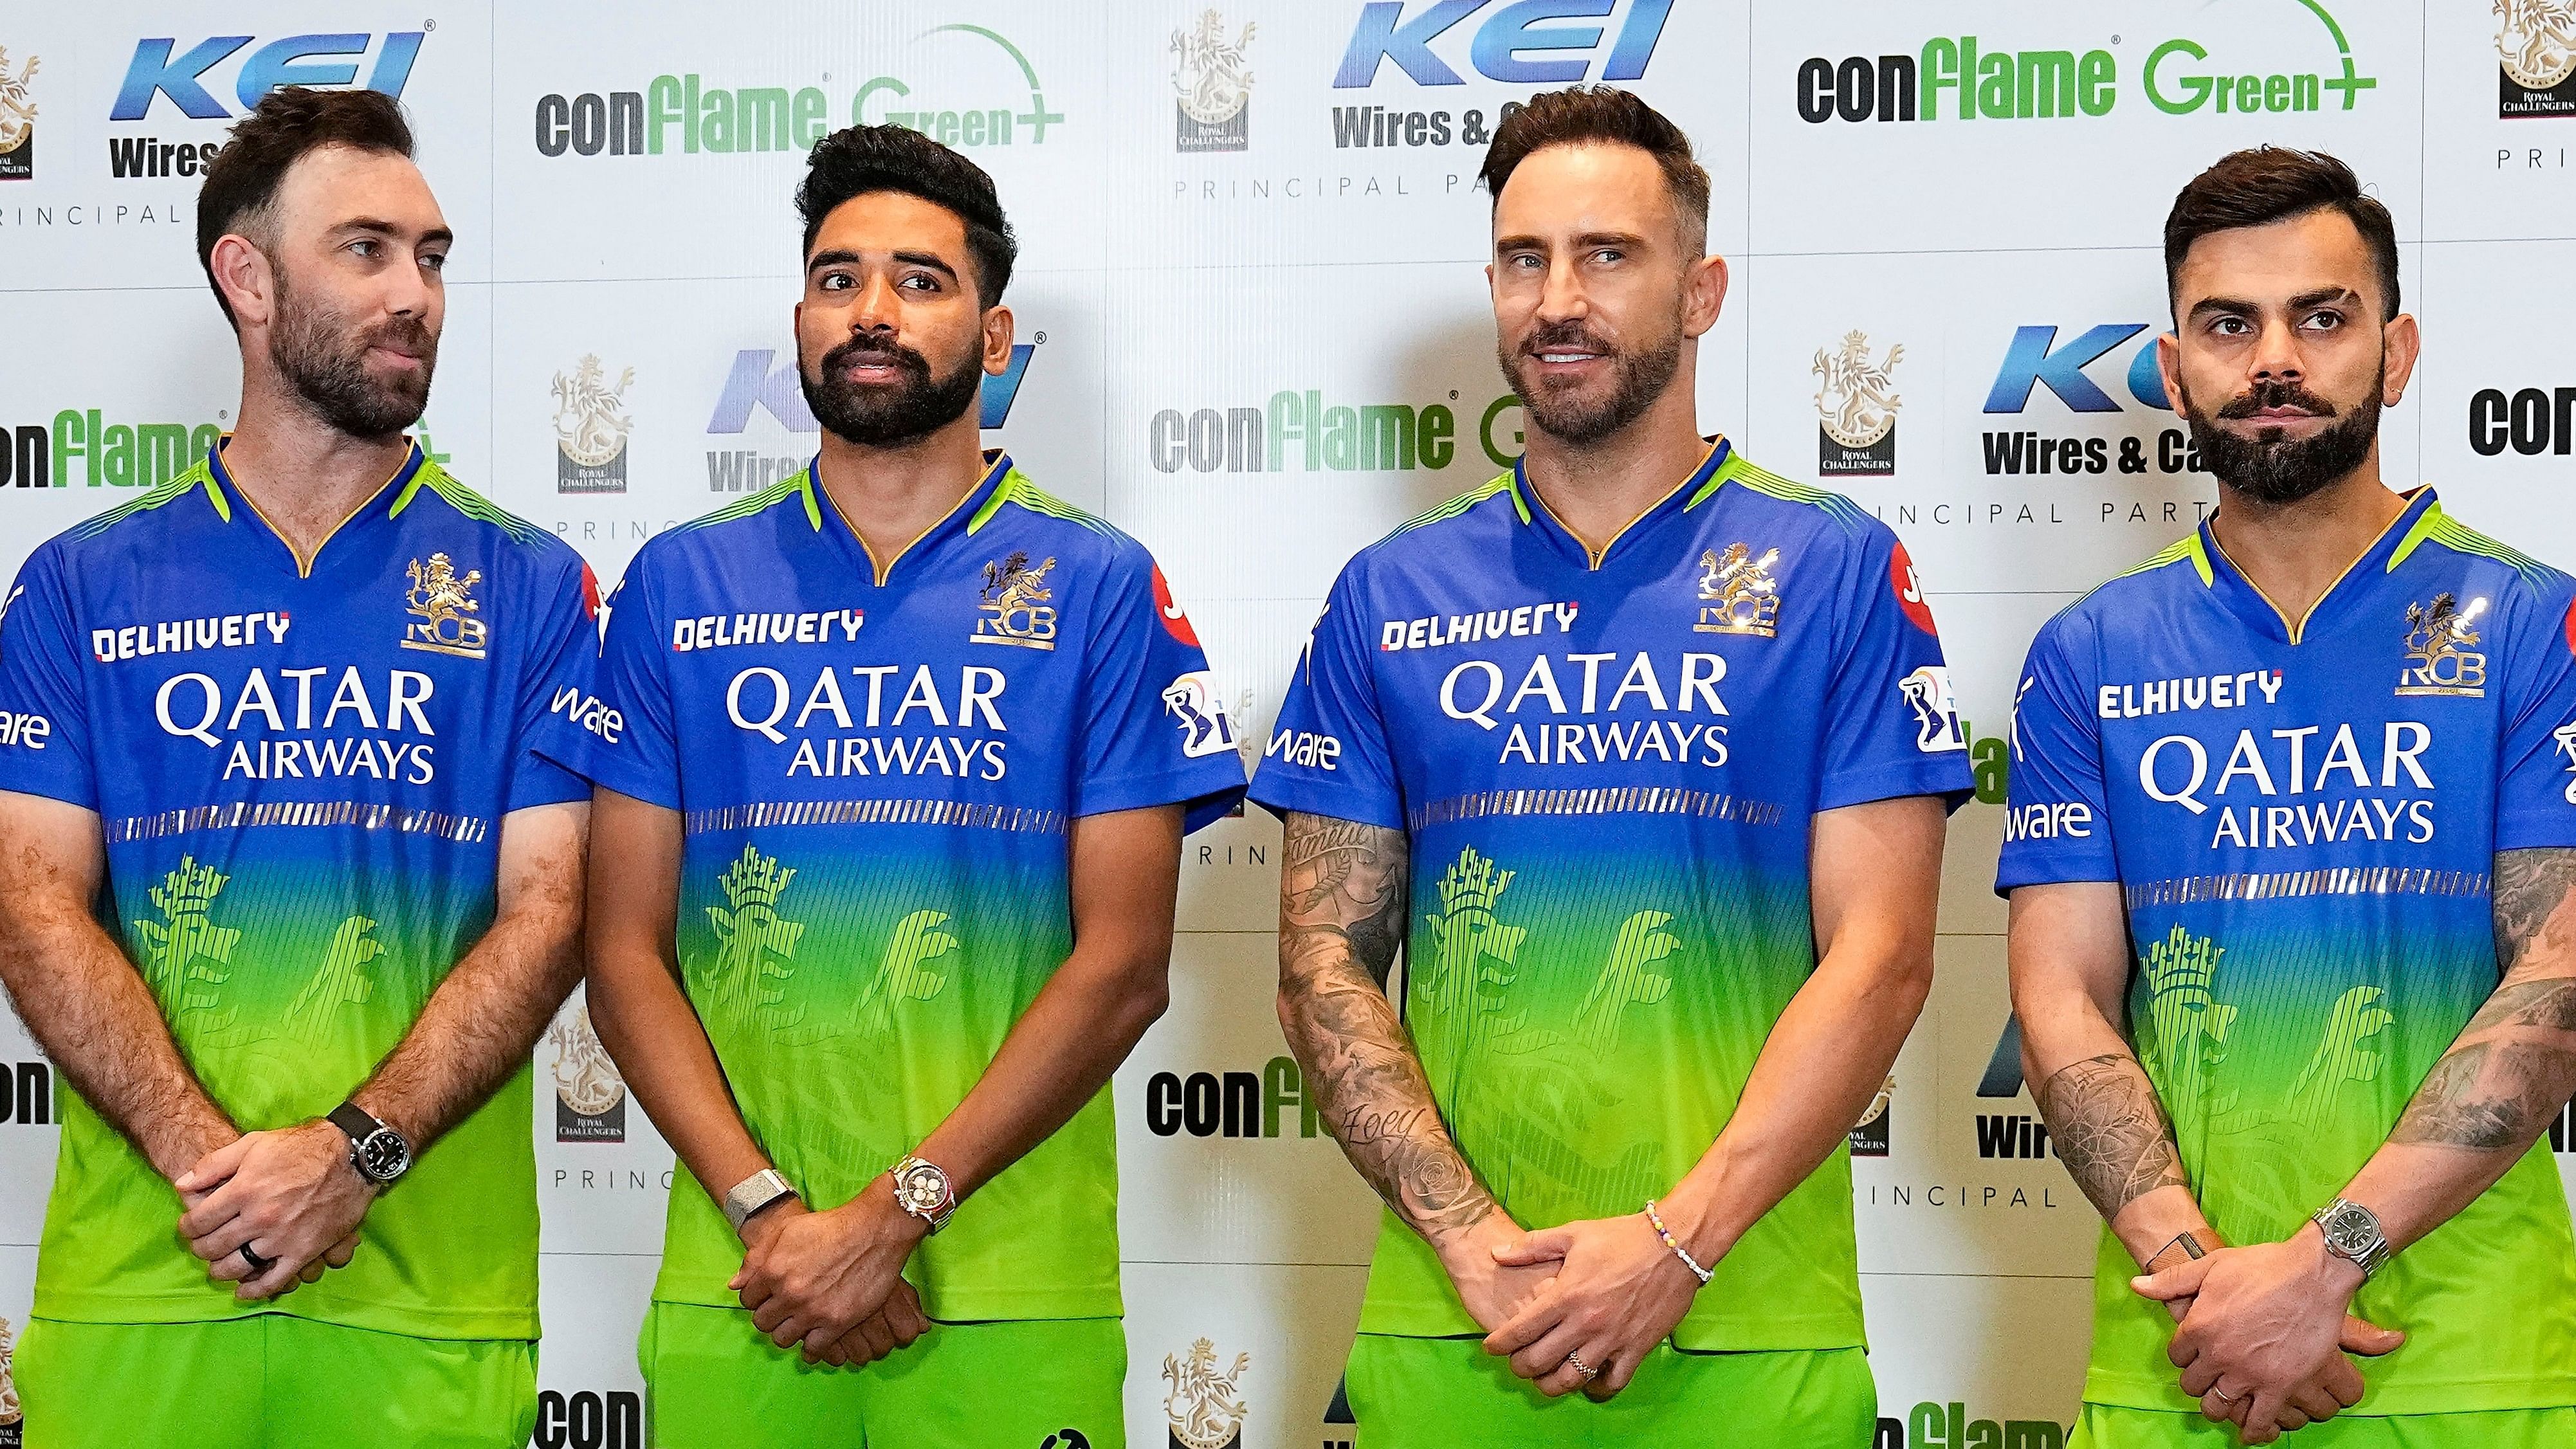 Royal Challengers Bengaluru captain Faf du Plessis (second from right) with teammates Virat Kohli (right), Mohammed Siraj (second from left) and Glenn Maxwell during the launch of team’s green jersey in Chennai on Wednesday. PTI